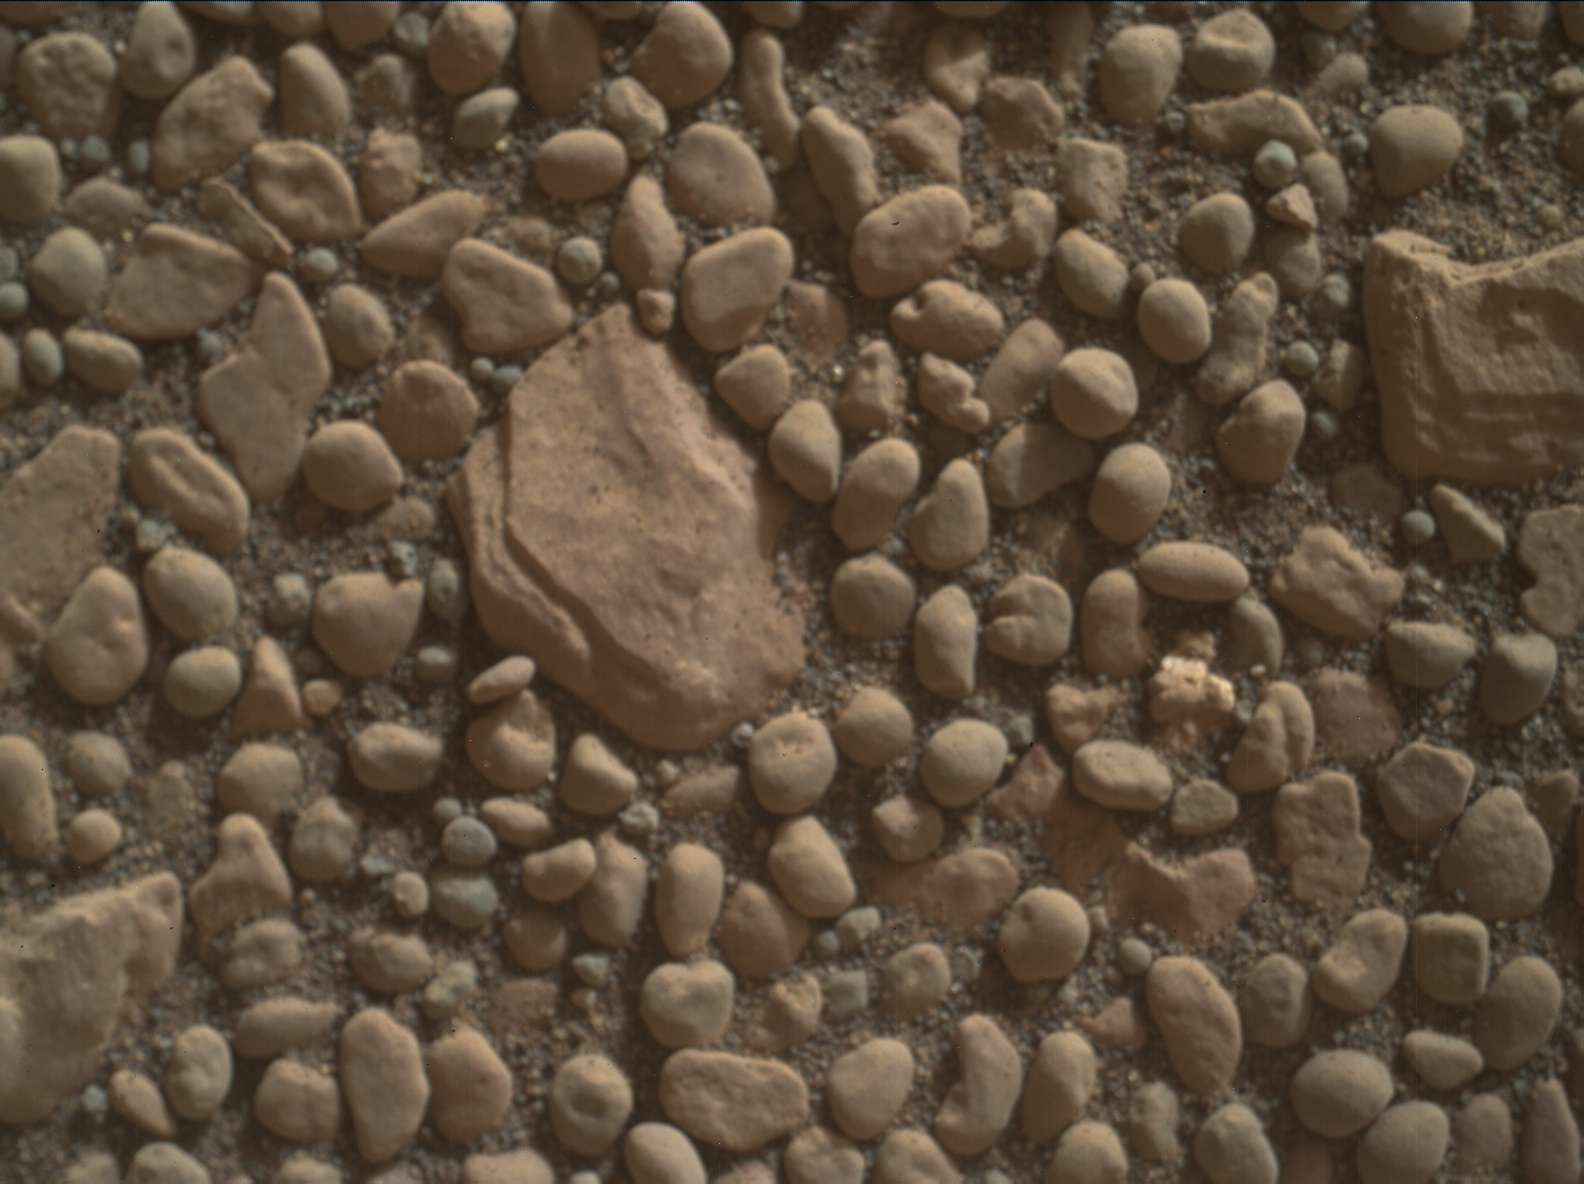 Nasa's Mars rover Curiosity acquired this image using its Mars Hand Lens Imager (MAHLI) on Sol 2356